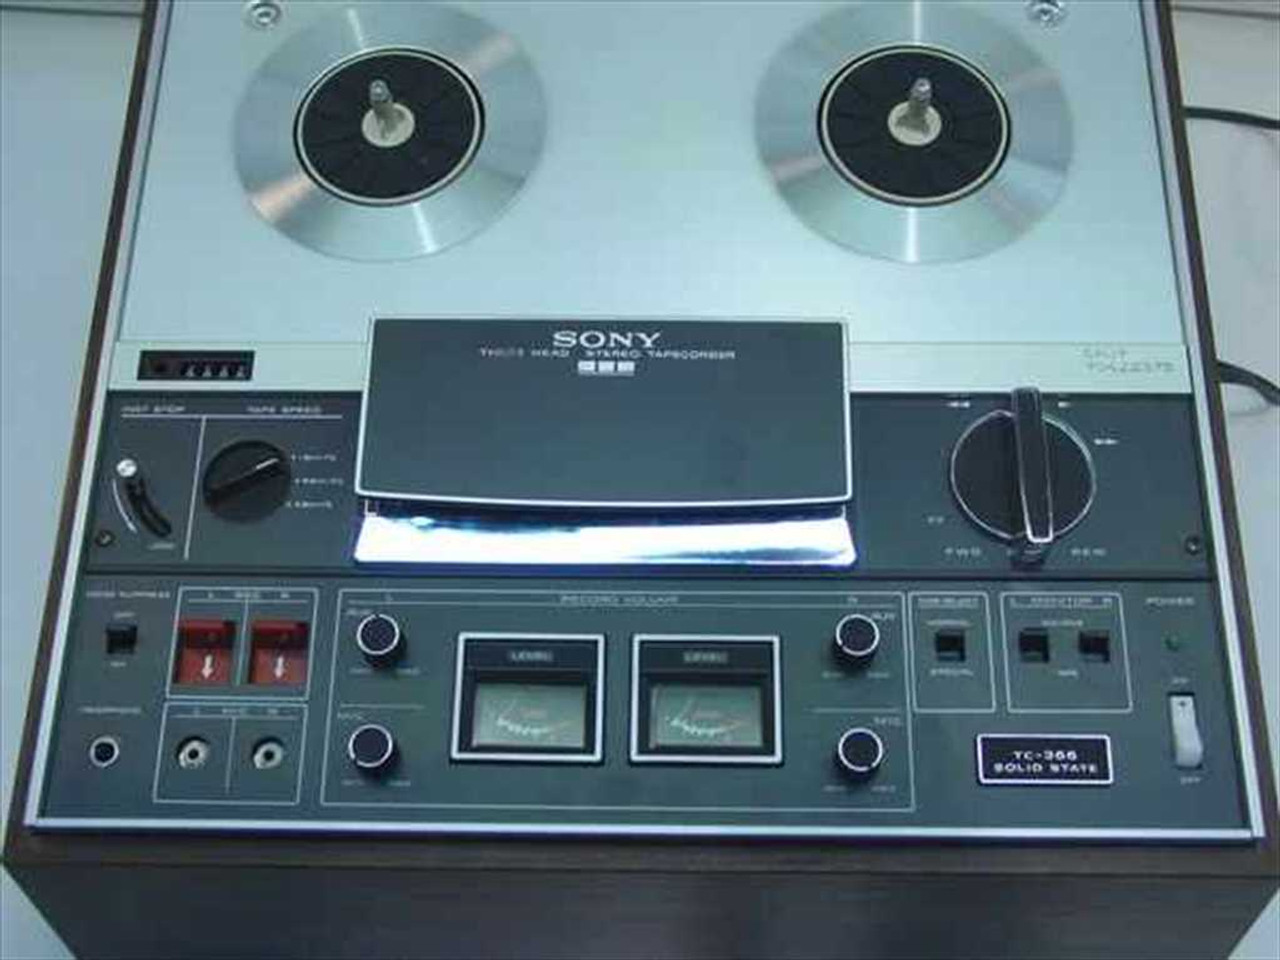 https://cdn11.bigcommerce.com/s-a1x7hg2jgk/images/stencil/1280x1280/products/29795/383086/Sony-TC-366-Vintage-Reel-to-Reel-Tape-Recorder_159492__46108.1708189983.jpg?c=2?imbypass=on